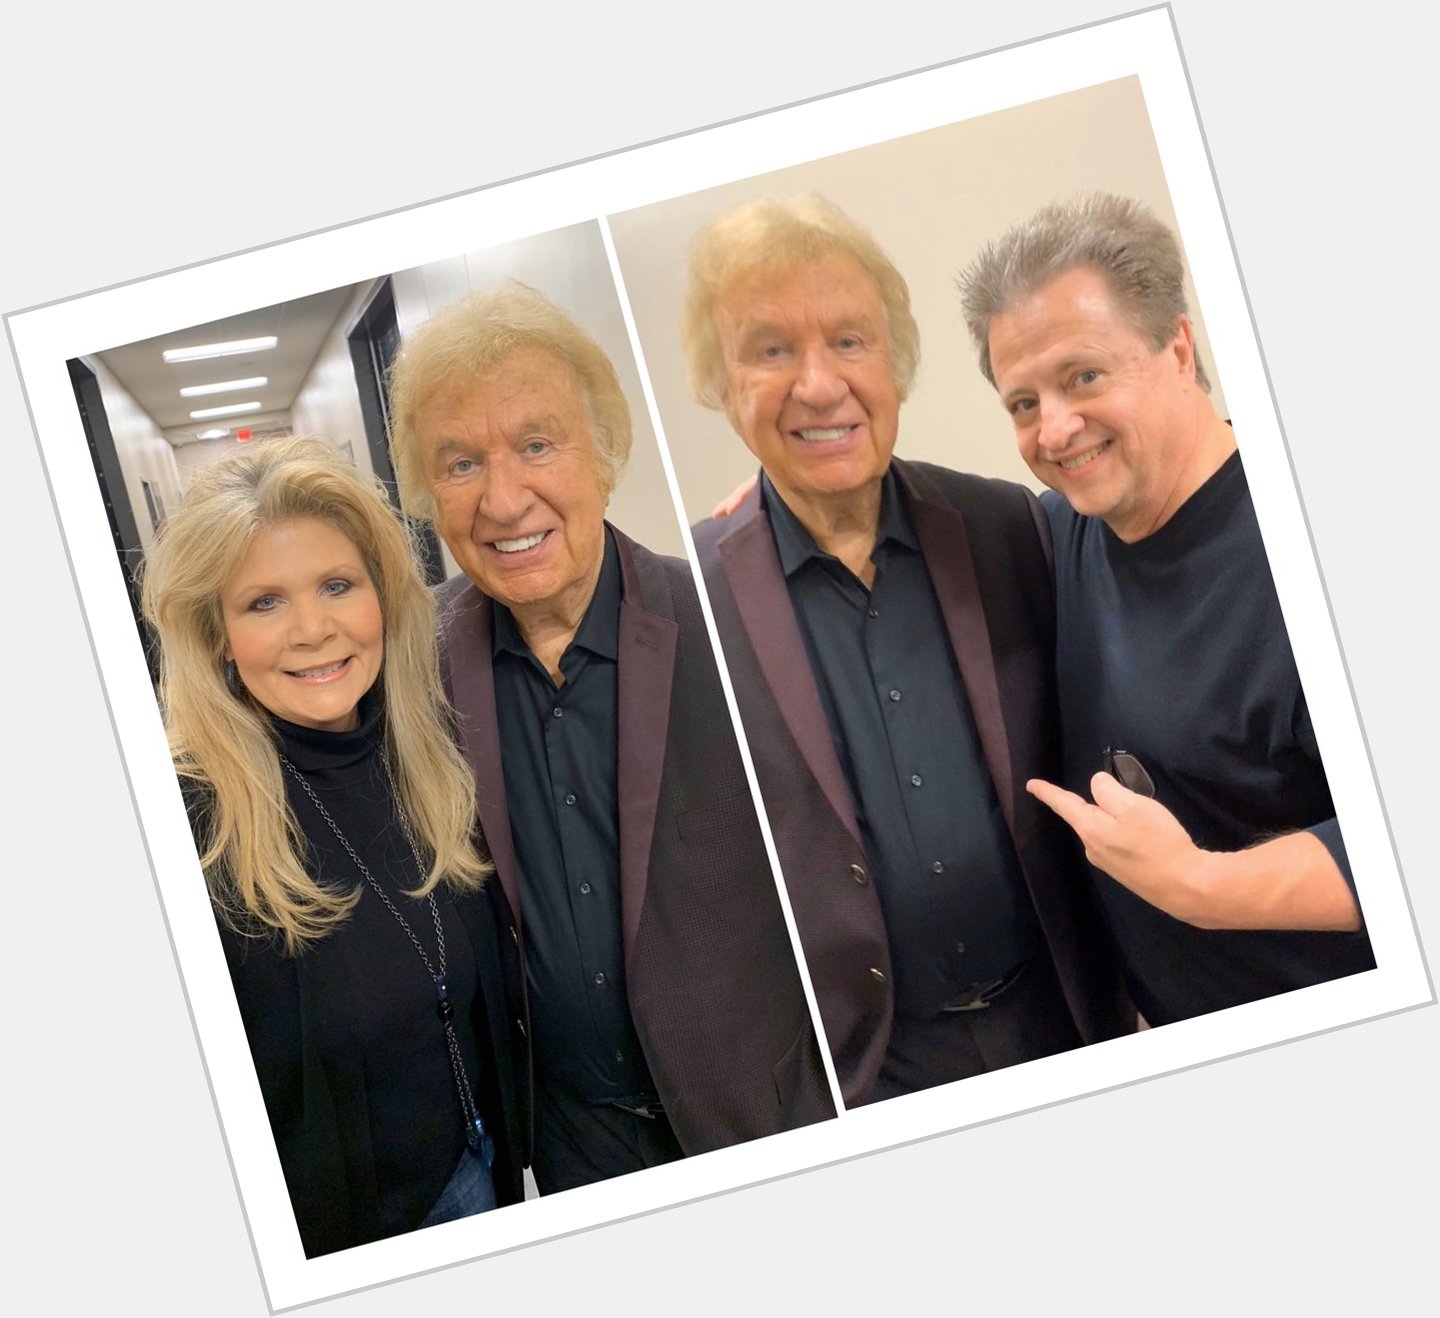  A Big Happy Birthday to Bill Gaither! We love you, Dear Sir! Linda and Michael 